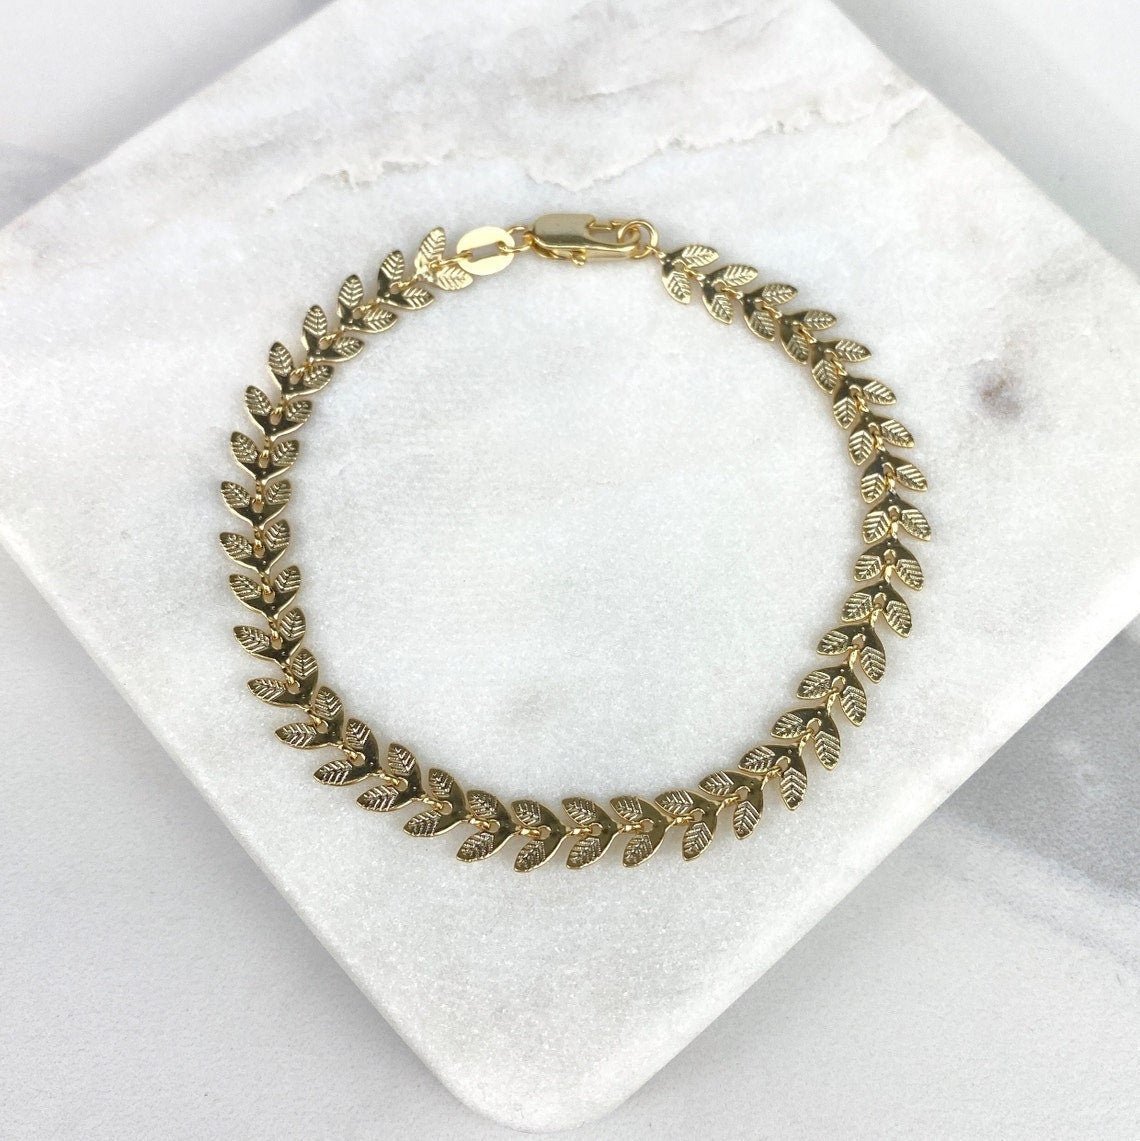 18k Gold Filled 6mm Leafs Chevron Link Chain Bracelet, Wholesale Jewelry Making Supplies